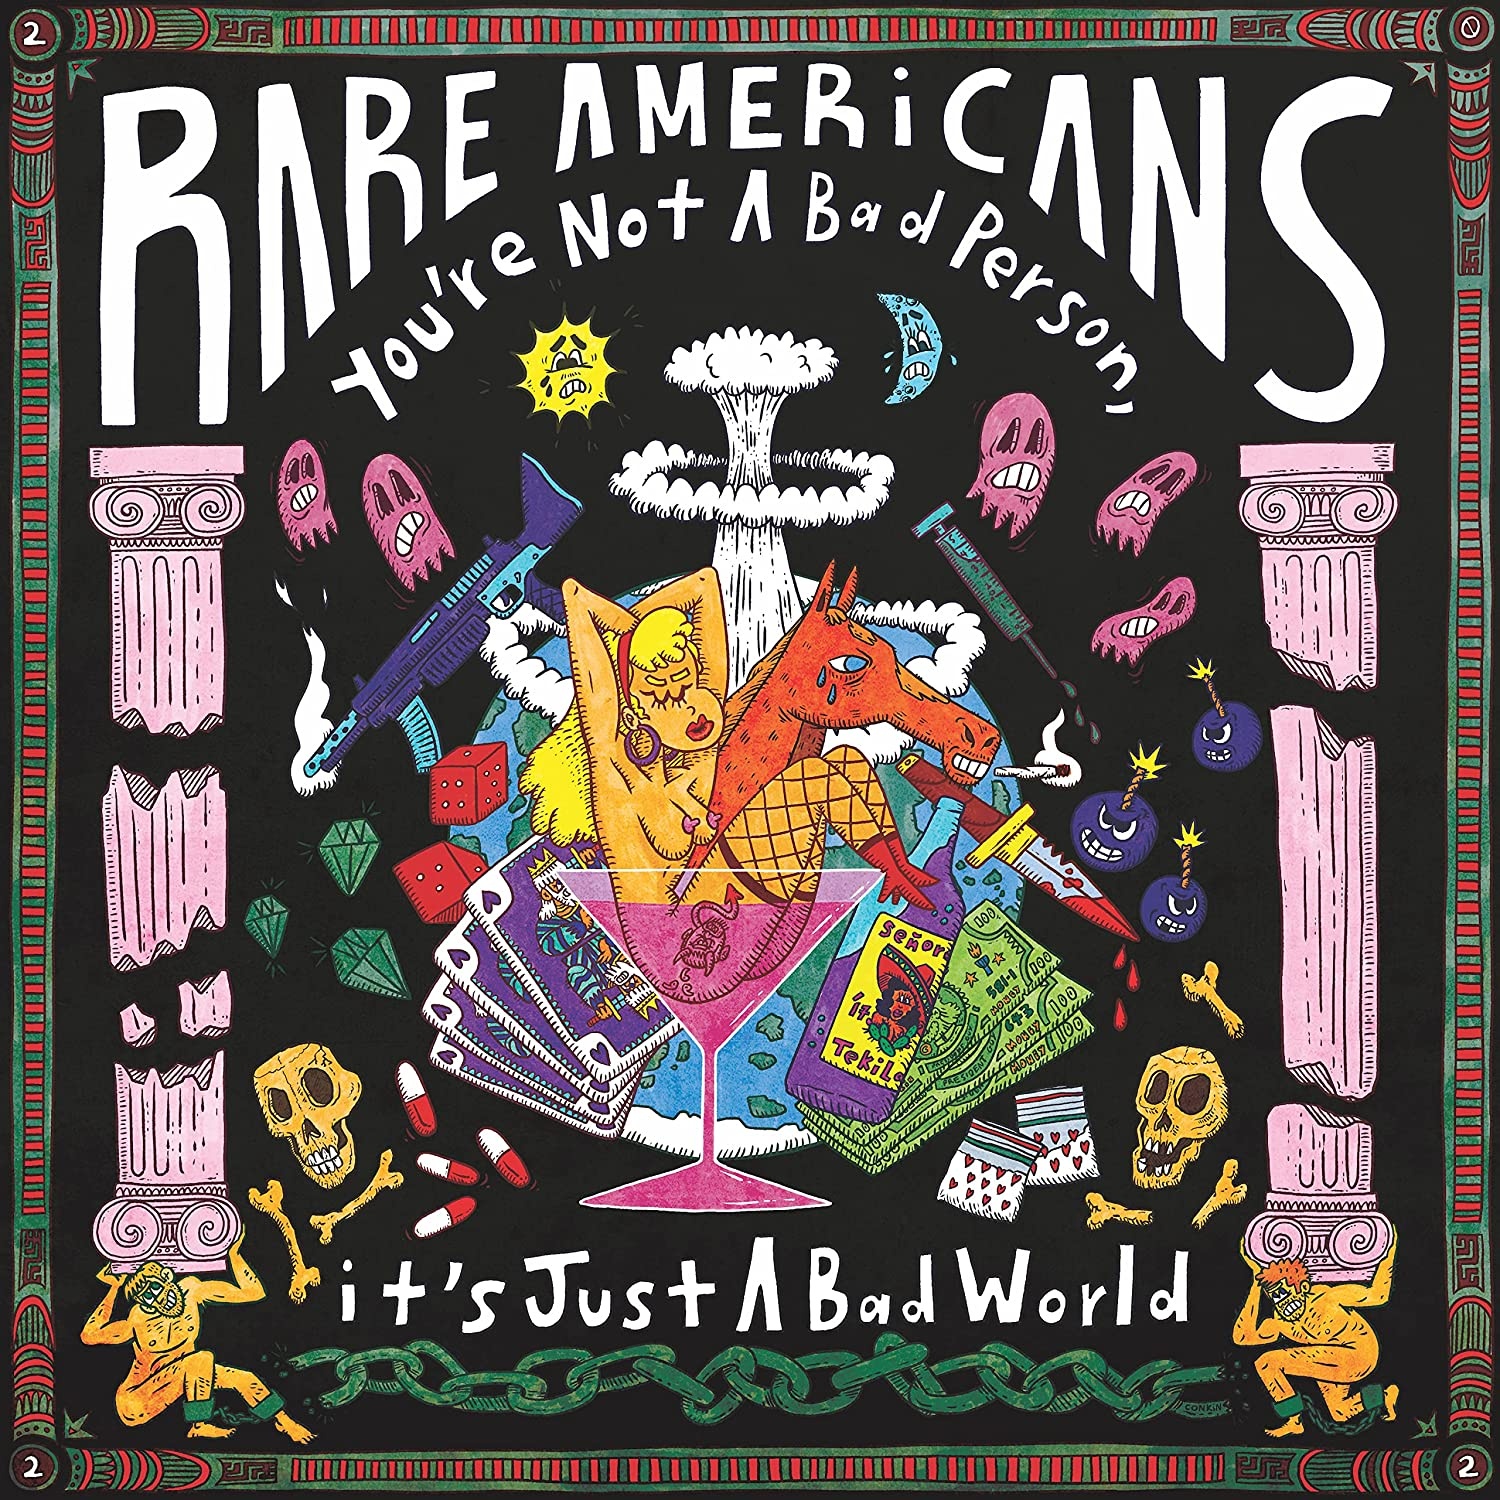 Rare Americans - Rare Americans 4: You’re Not a Bad Person, It’s Just a Bad World vinyl cover